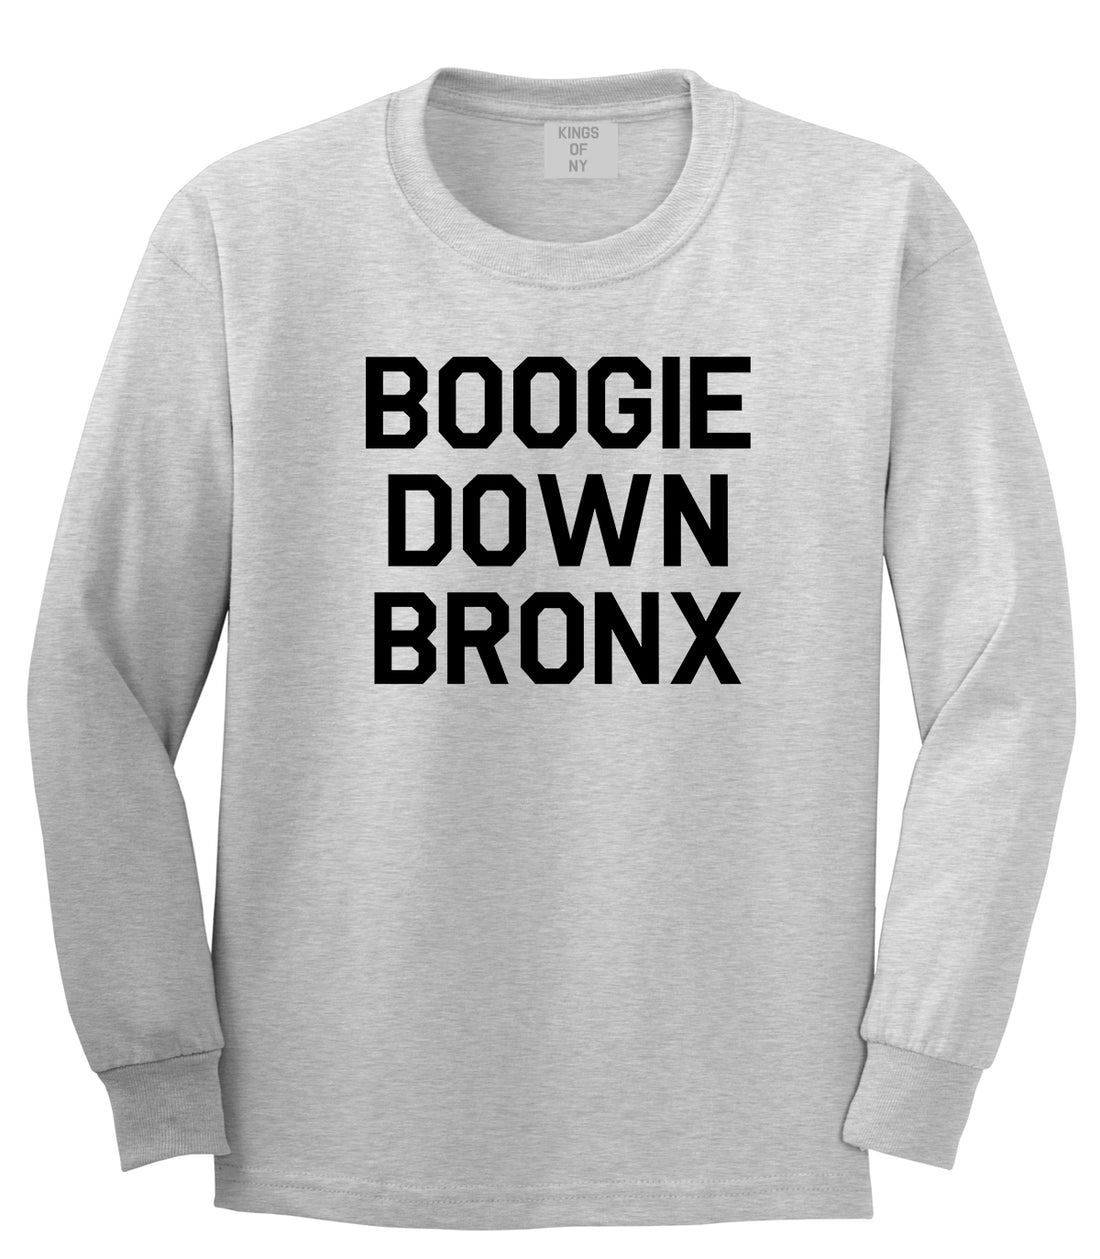 Boogie Down Bronx Mens Long Sleeve T-Shirt Grey by Kings Of NY